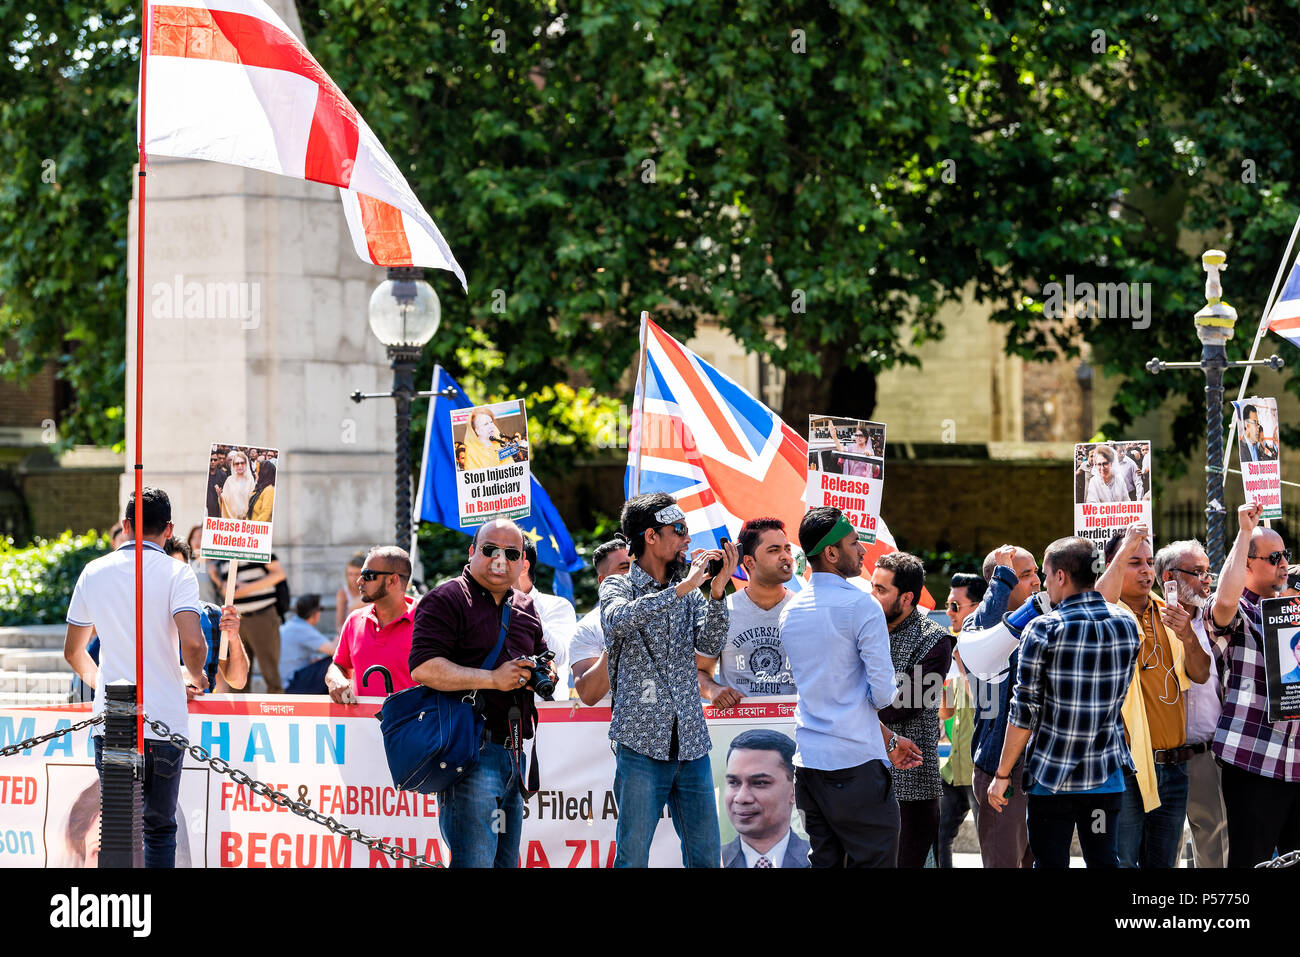 London, United Kingdom - June 25, 2018: People standing at Bangladesh protest in UK England by Westminster with signs for releasing Begum Khaleda Zia, former Nationalist Party leader, flags Credit: Kristina Blokhin/Alamy Live News Stock Photo